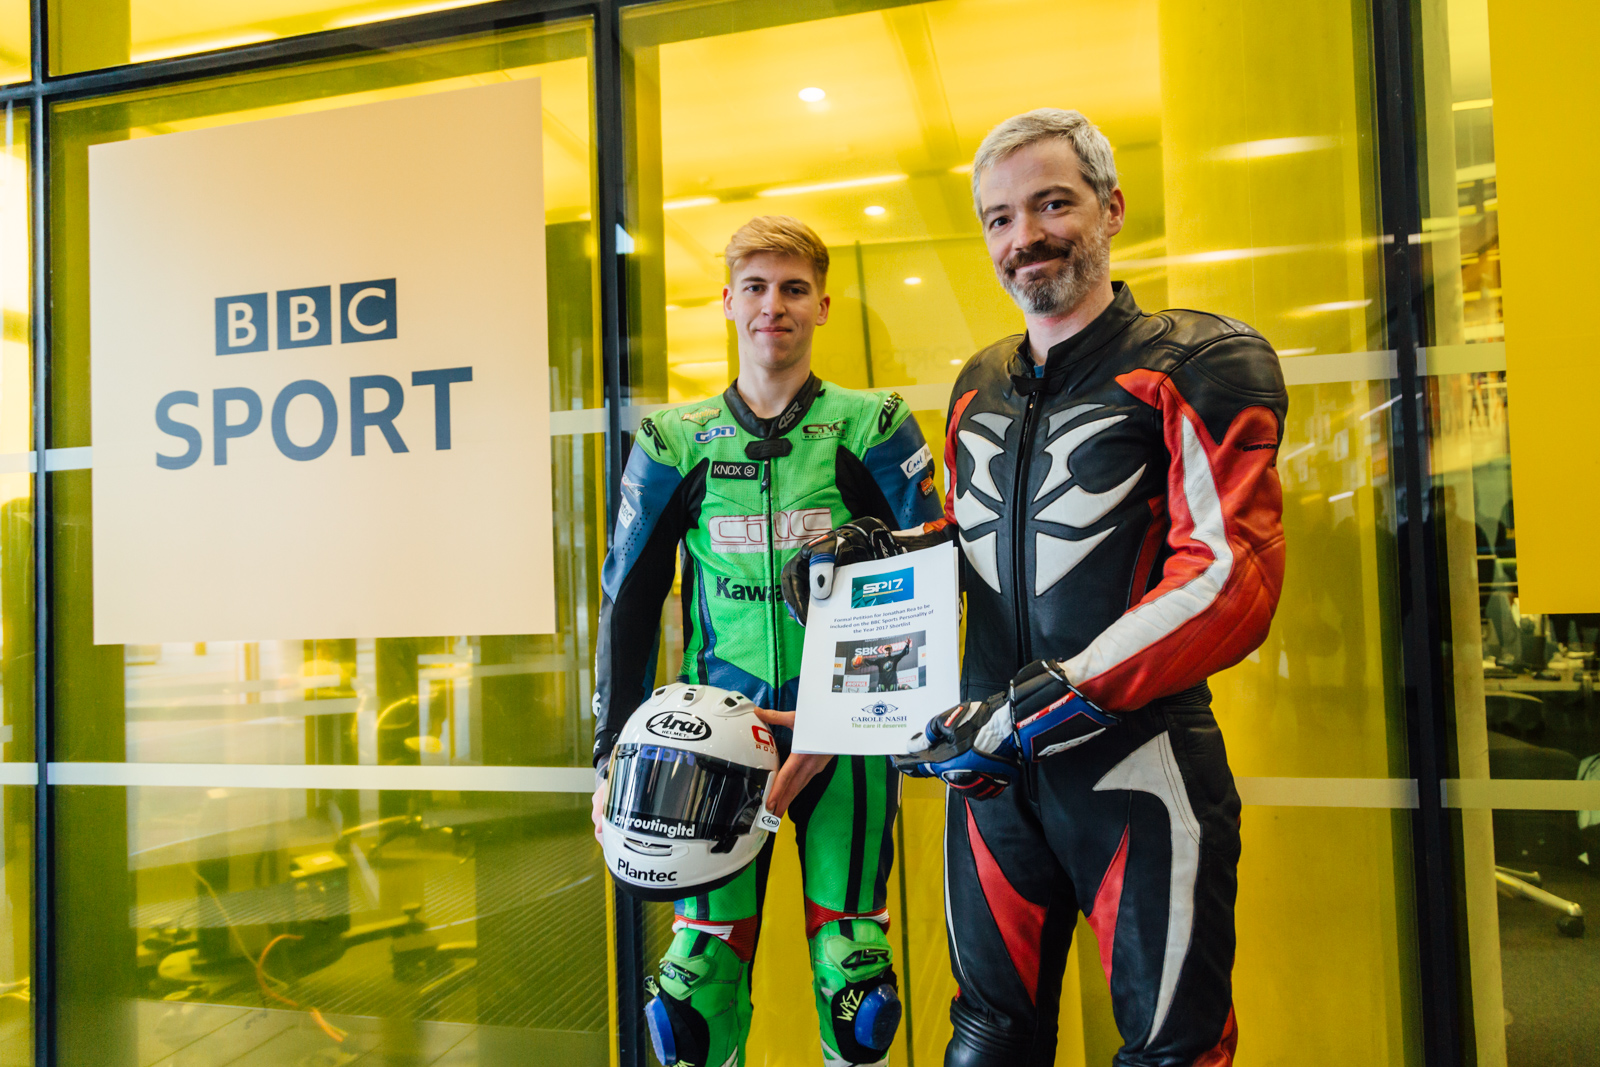 BBC handed 10,000 signatures demanding Jonathan Rea make Sports Personality of the Year shortlist